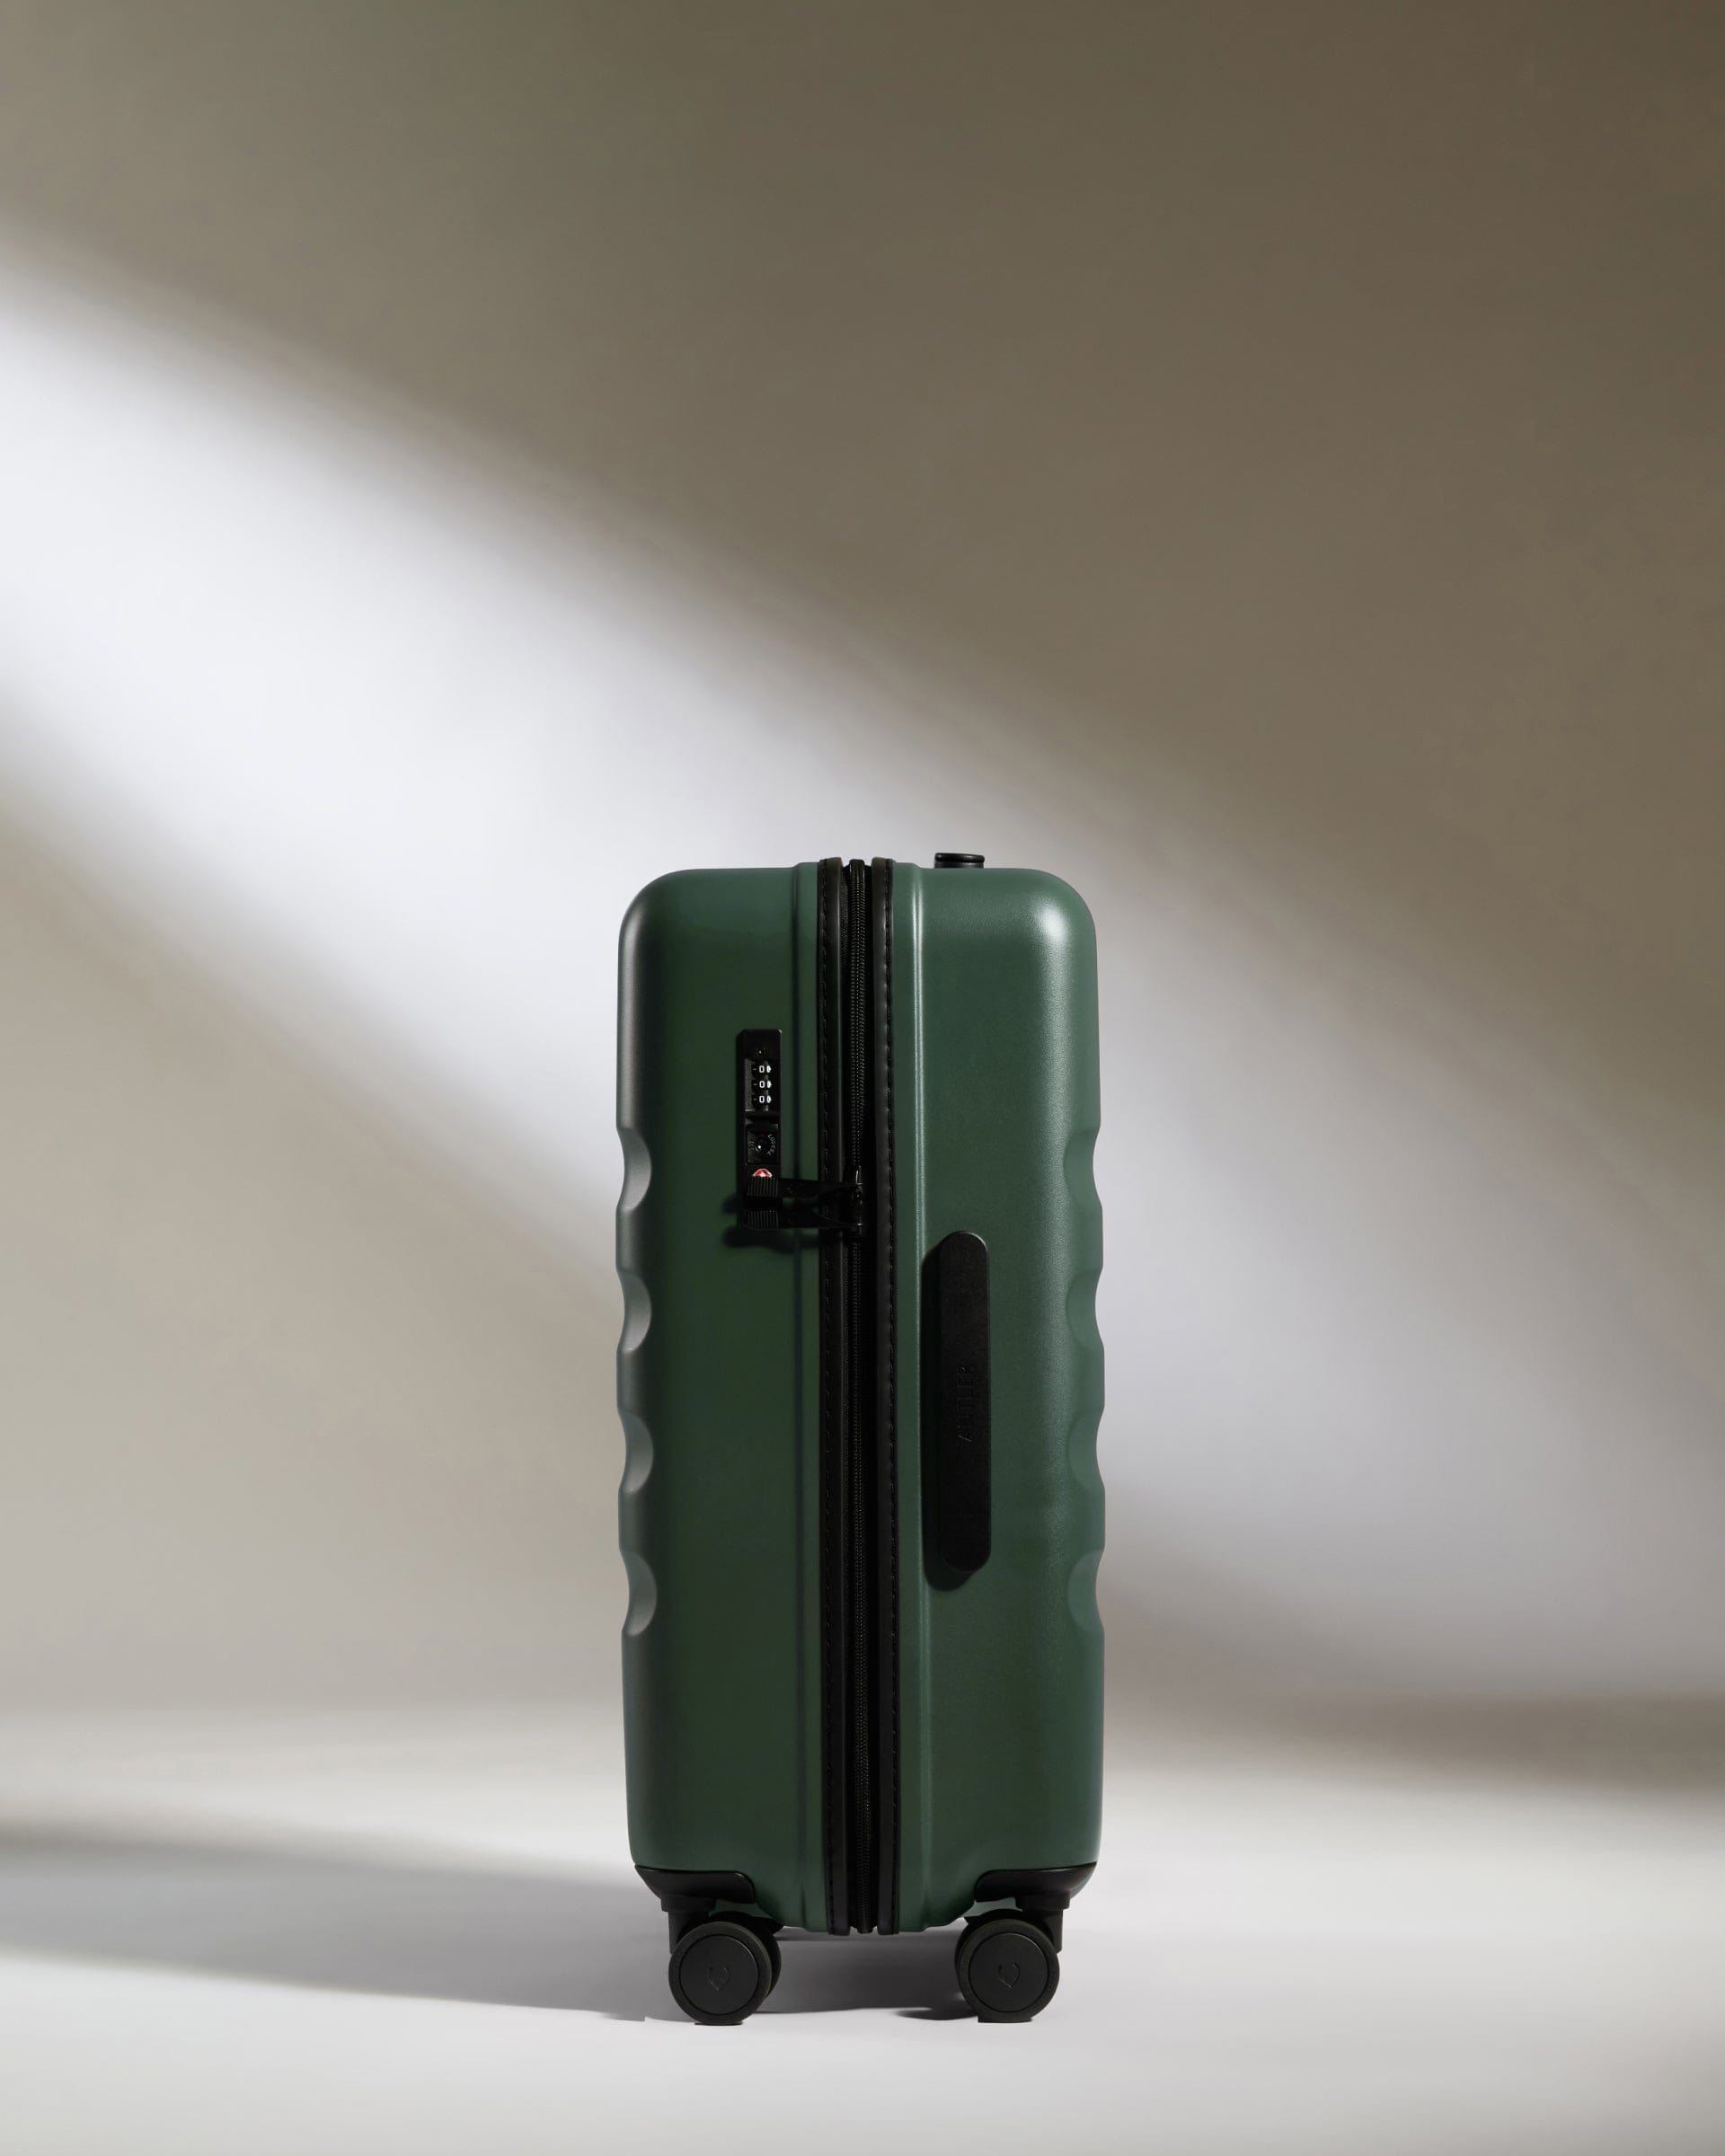 Antler Luggage -  Icon Stripe Biggest Cabin in Antler Green - Hard Suitcase Icon Stripe Biggest Cabin in Green | Lightweight & Hard Shell Suitcase